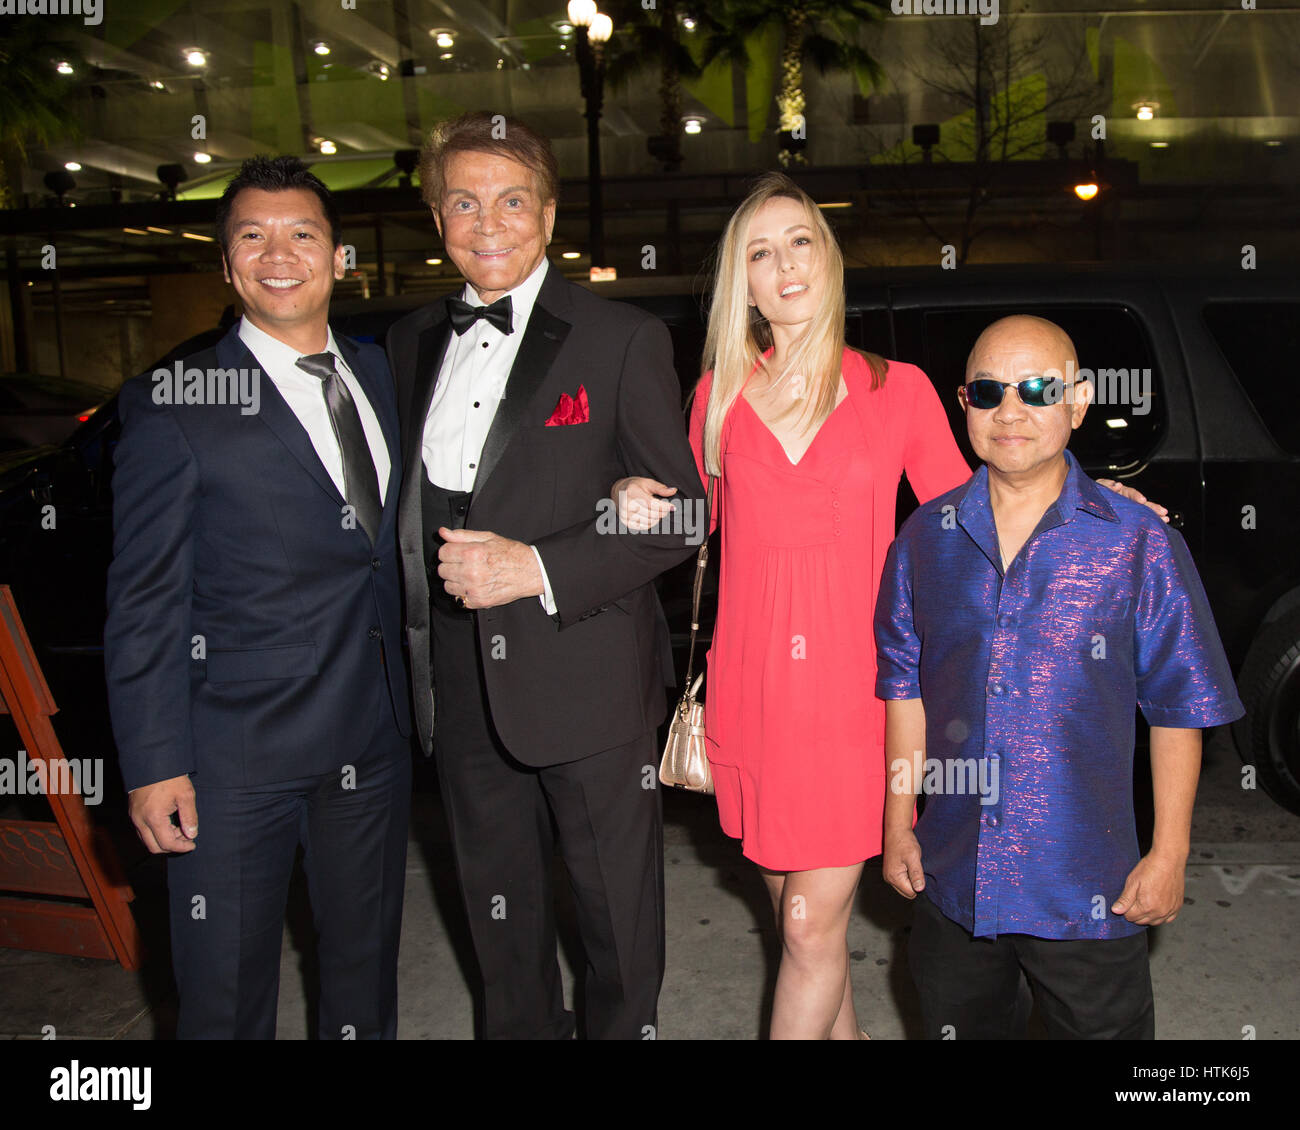 Los Angeles, California, USA. 11th March, 2017. Actor Jon Miguel, actor Mel Novak, actress Olya Lvova, and actor David Prak arrive at the world premiere of   'Syndicate Smasher', an action-packed crime thriller movie, at the Downtown Independent Theatre in Los Angeles, California, on March 11, 2017. © Sheri Determan/Alamy Live News Stock Photo